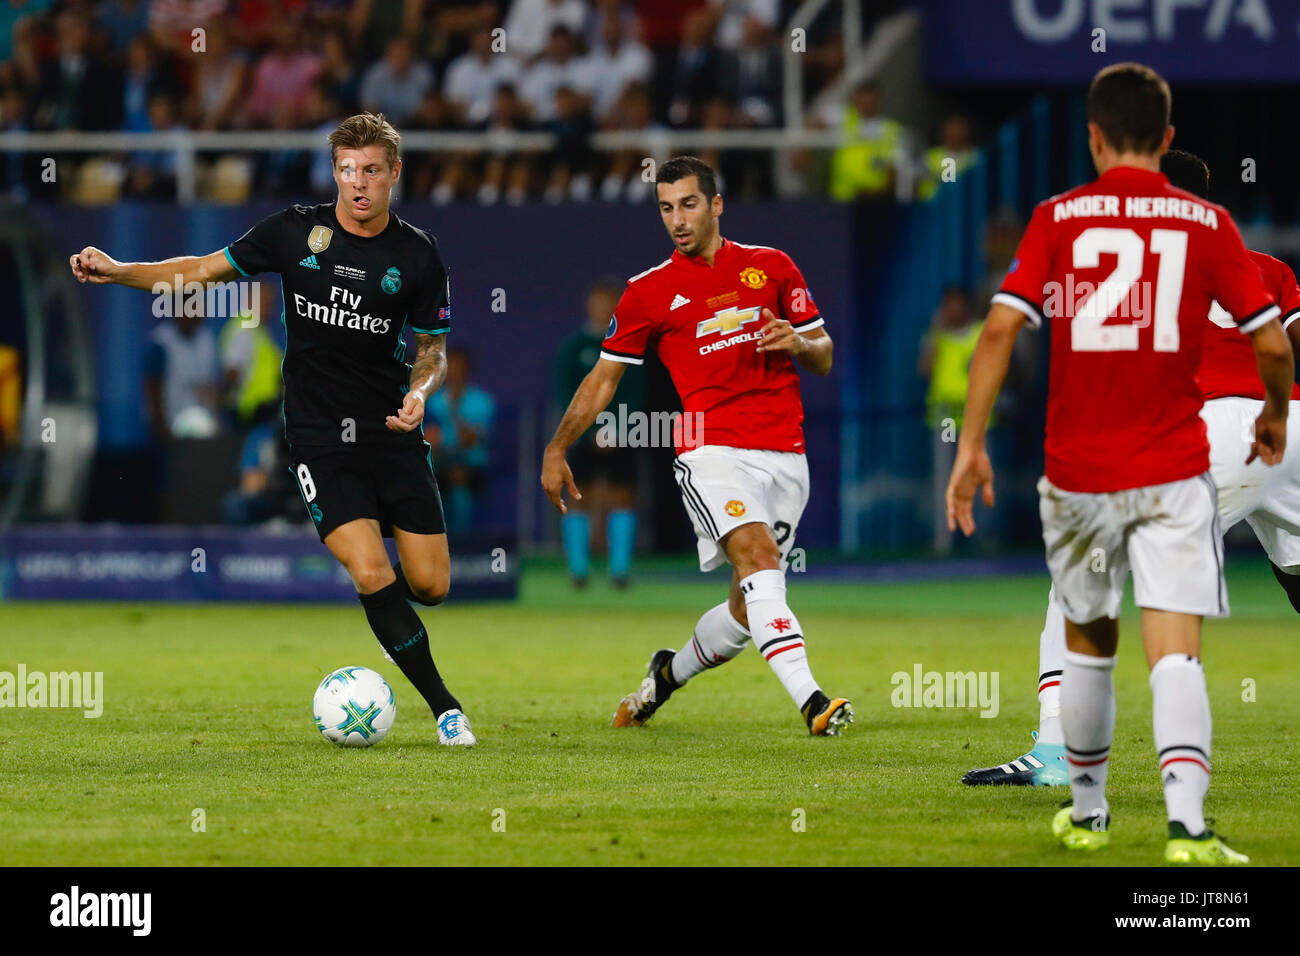 Skopje, Macedonia. 8th Aug, 2017. Toni Kroos (8) Real Madrid's player. UEFA  SUPER CUP FINAL between Real Madrid vs Manchester United match at the  Philipo II National Arena (Skopje) Macedonia, August 8,